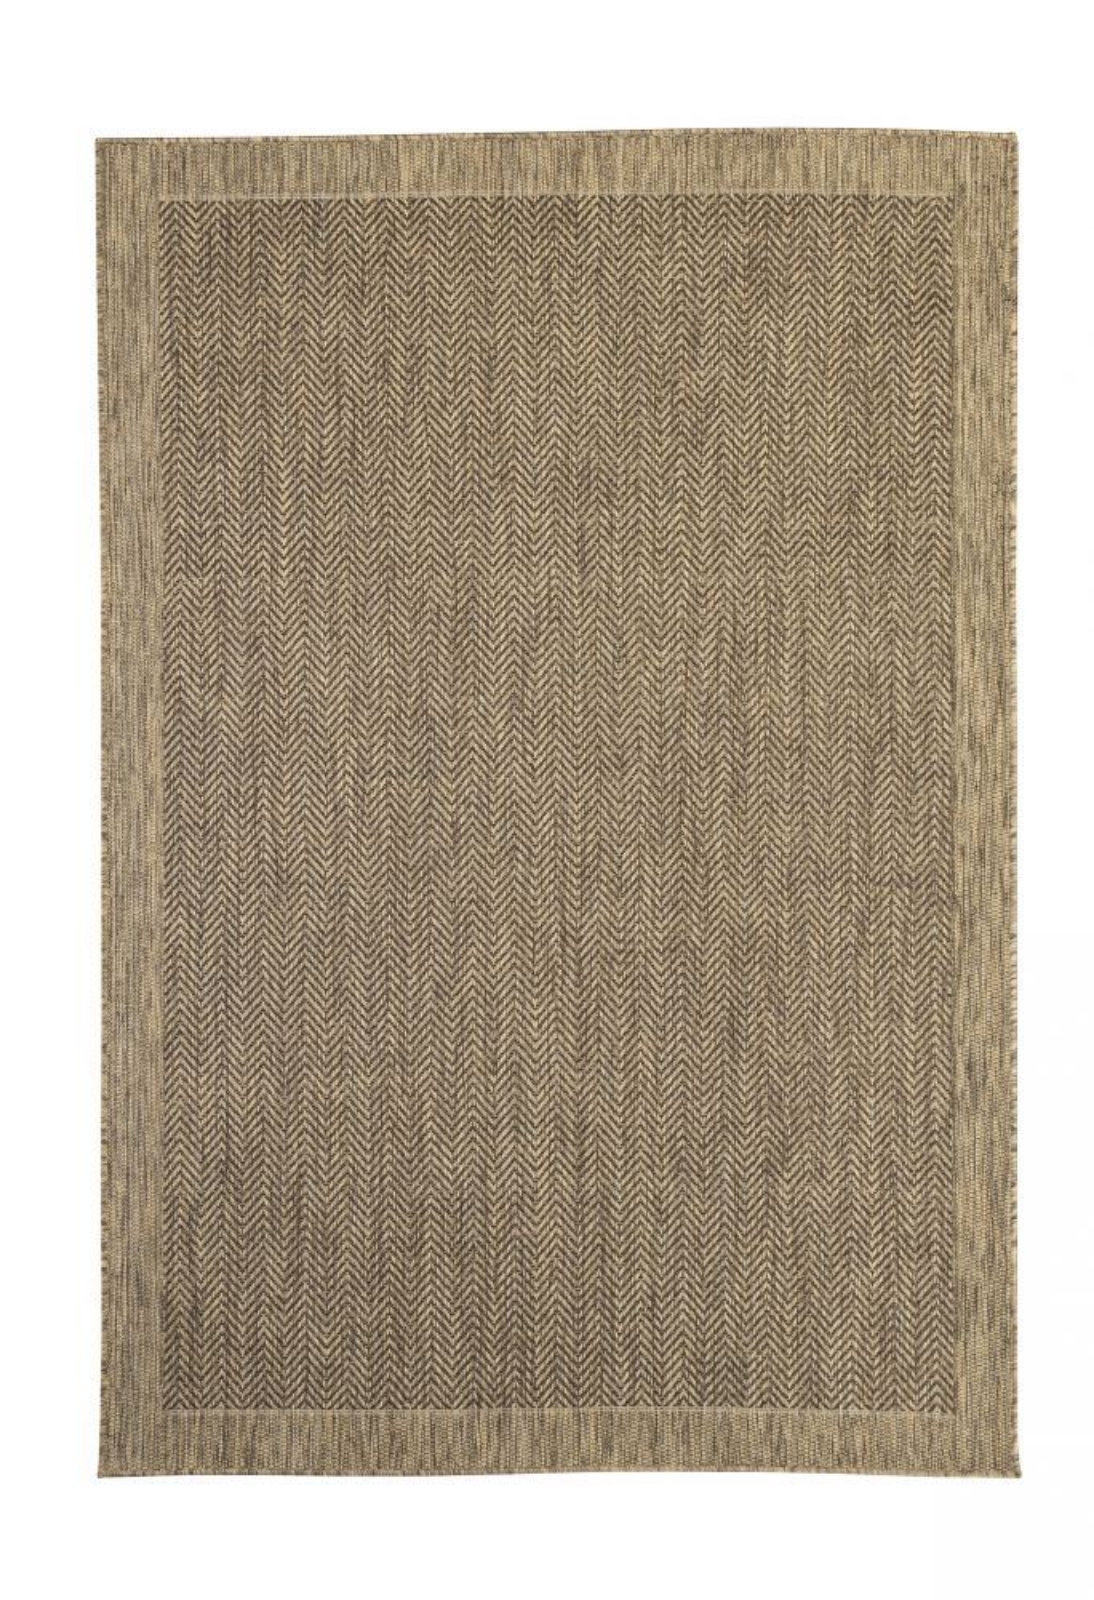 Picture of Tacy Medium Rug